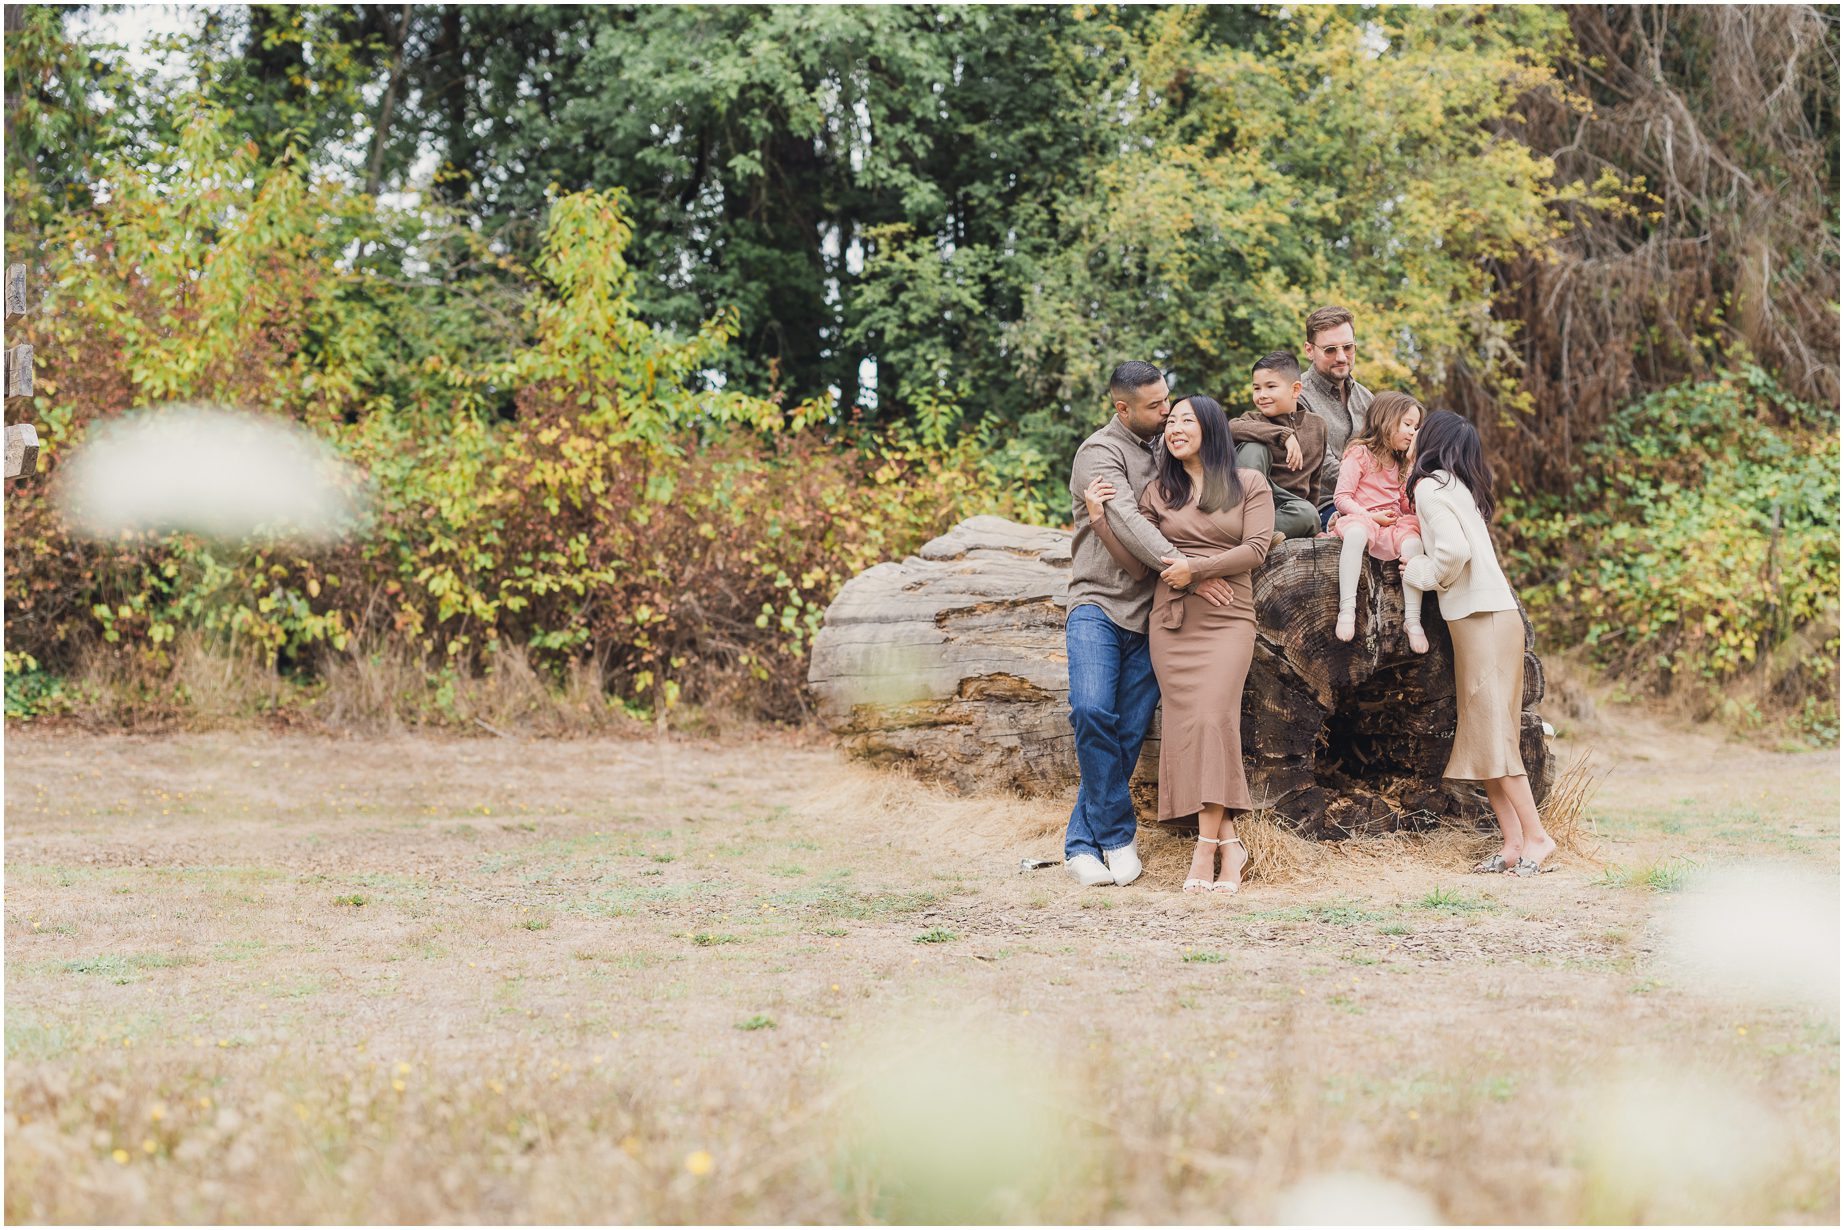 Tigard Family Photographer: Sun and Sparrow, takes whimsical pictures of a family in Dirksen Nature park